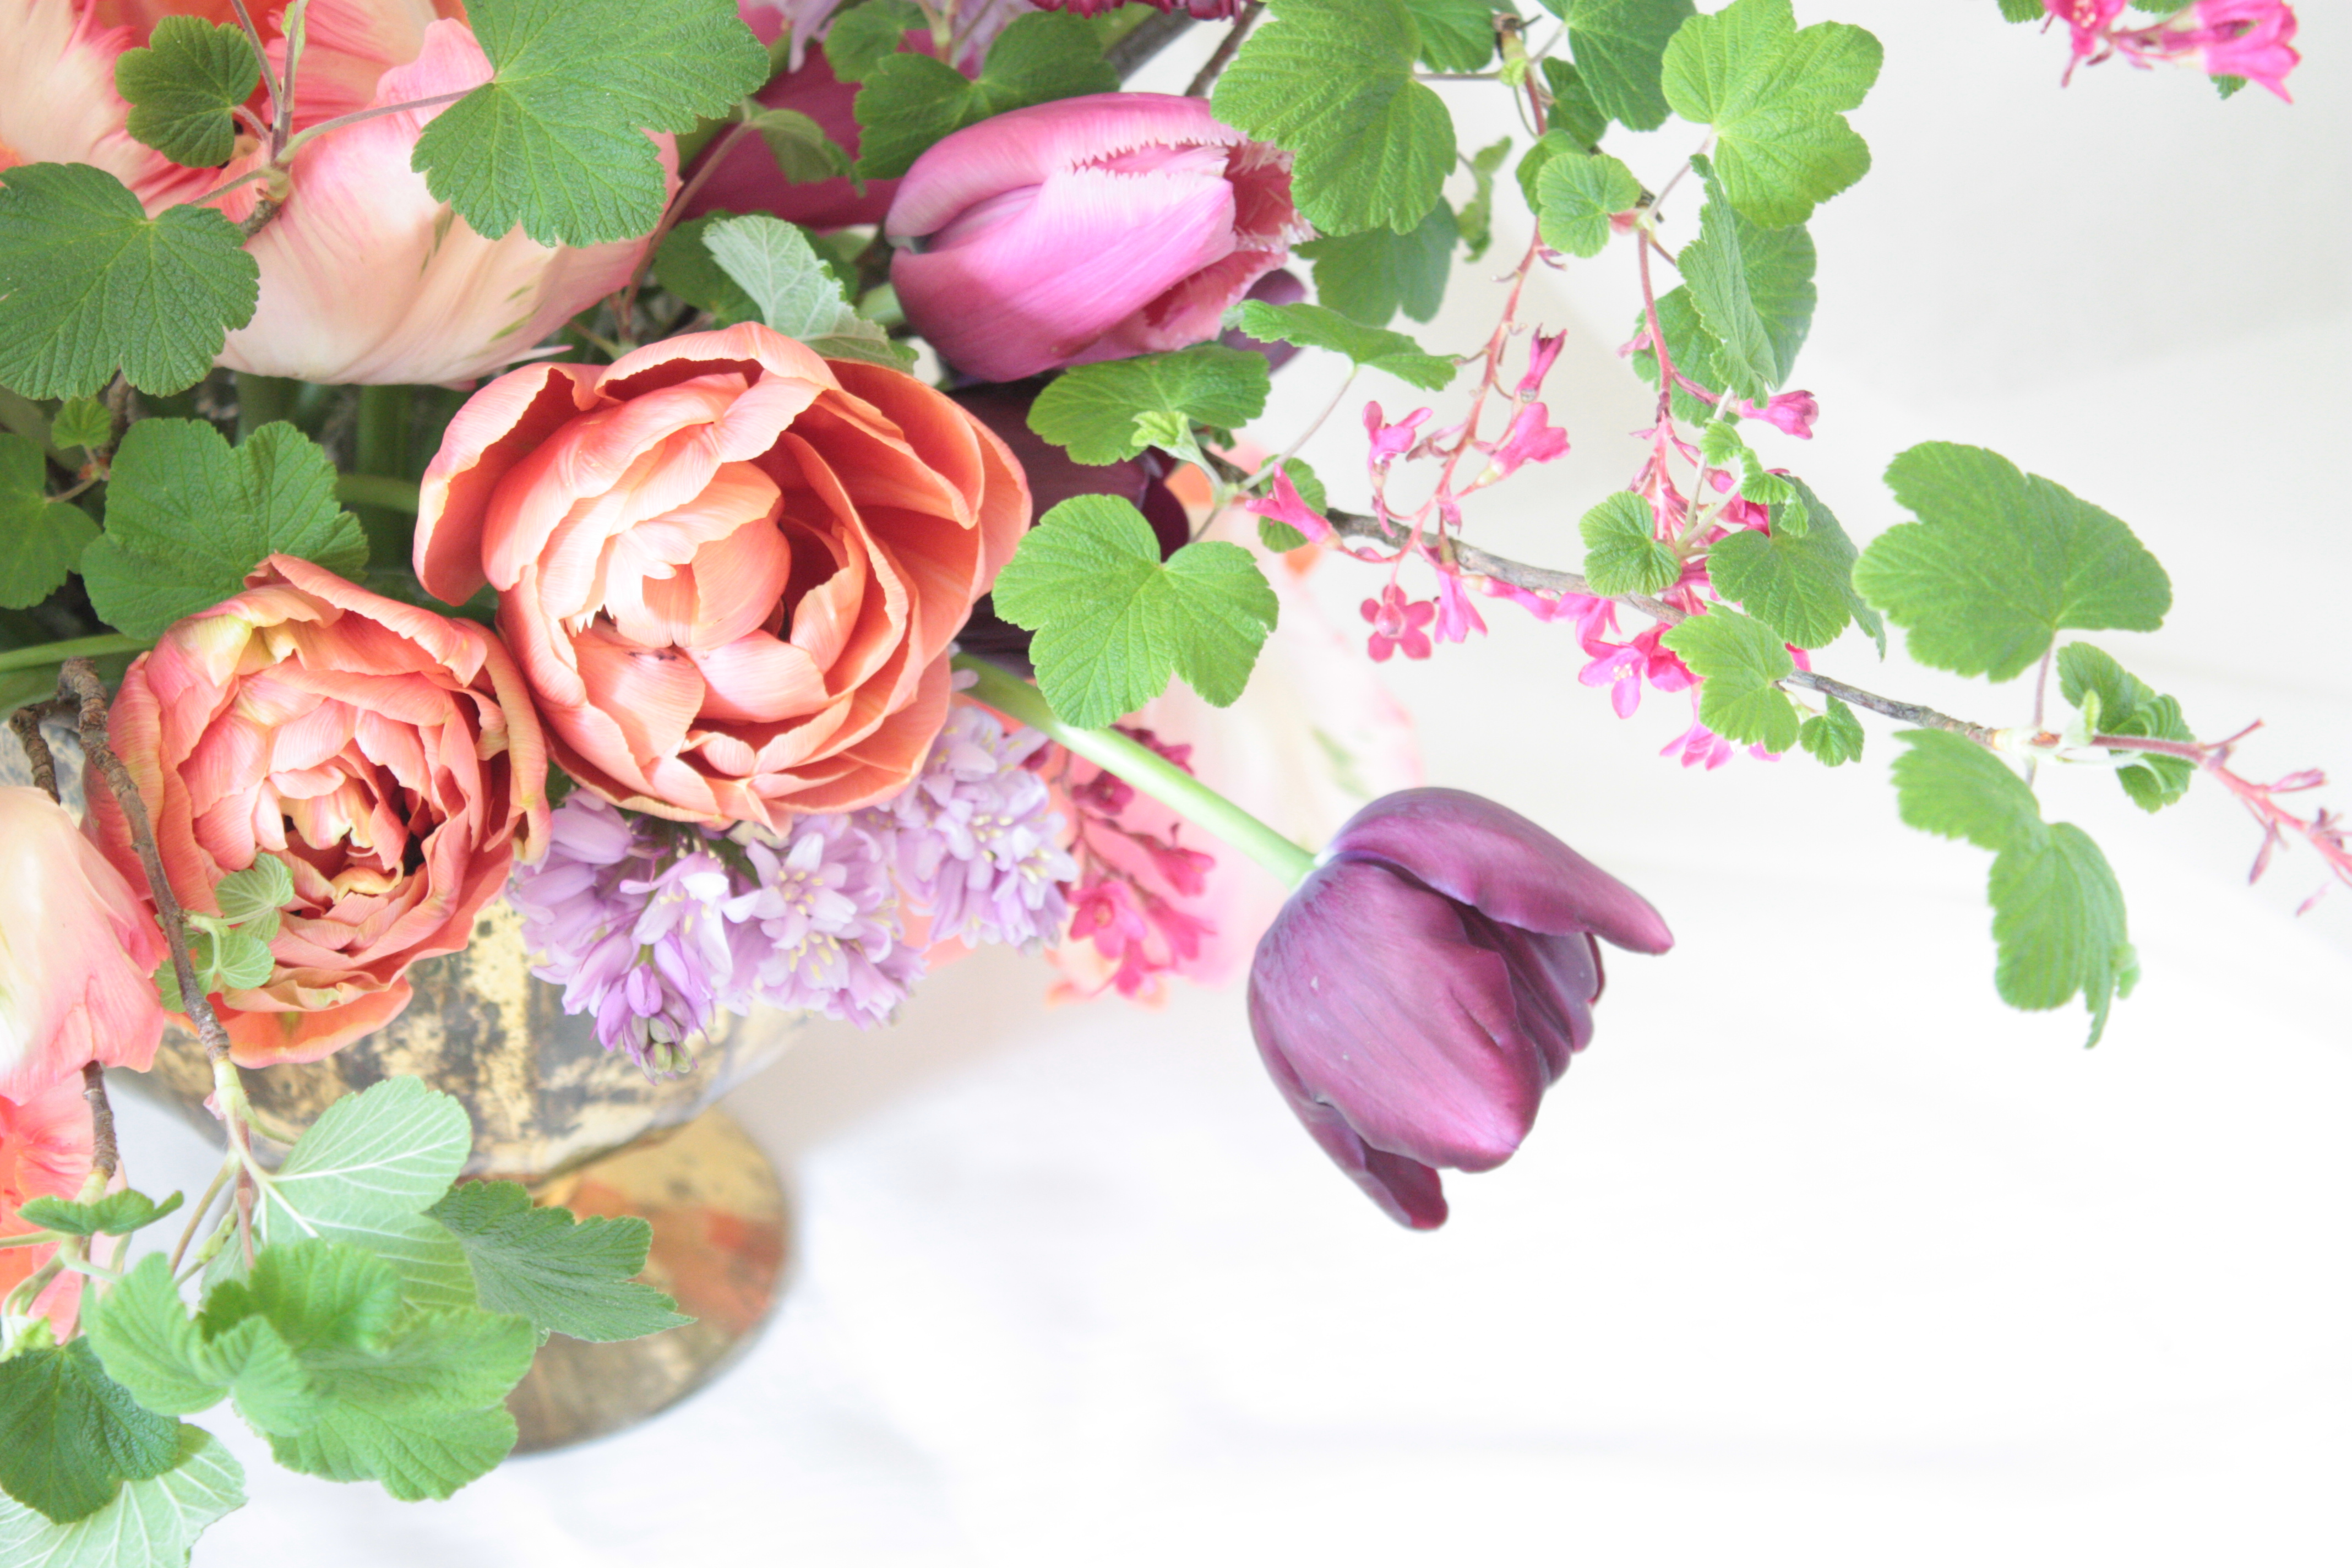 sustainable floristry in foam-free arrangement with no floral foam